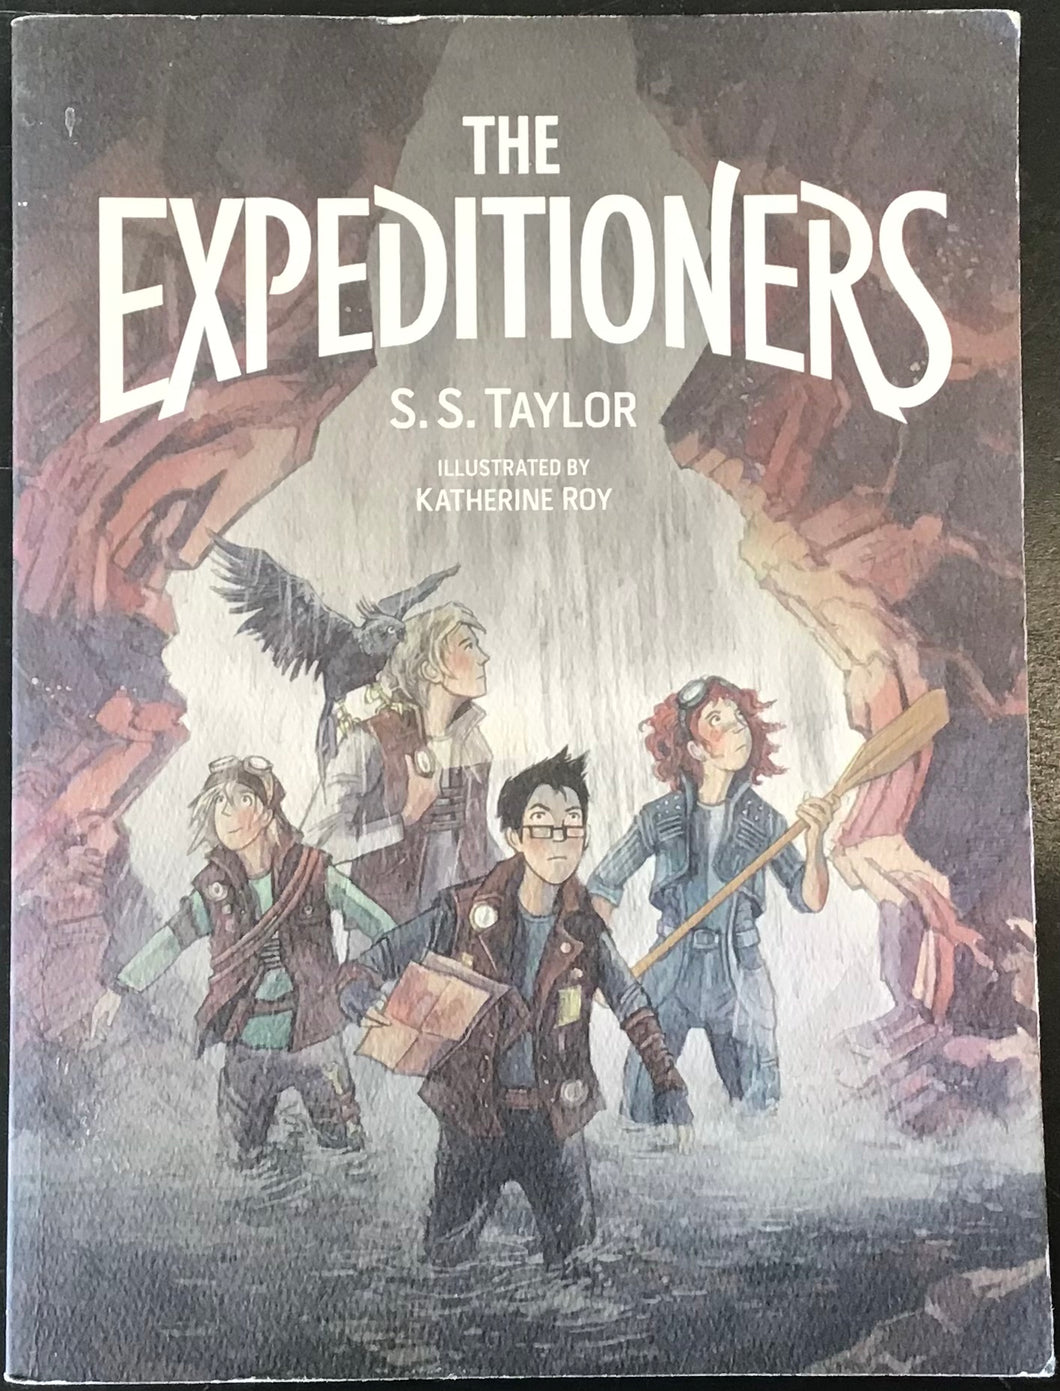 The Expeditioners- S.S. Taylor